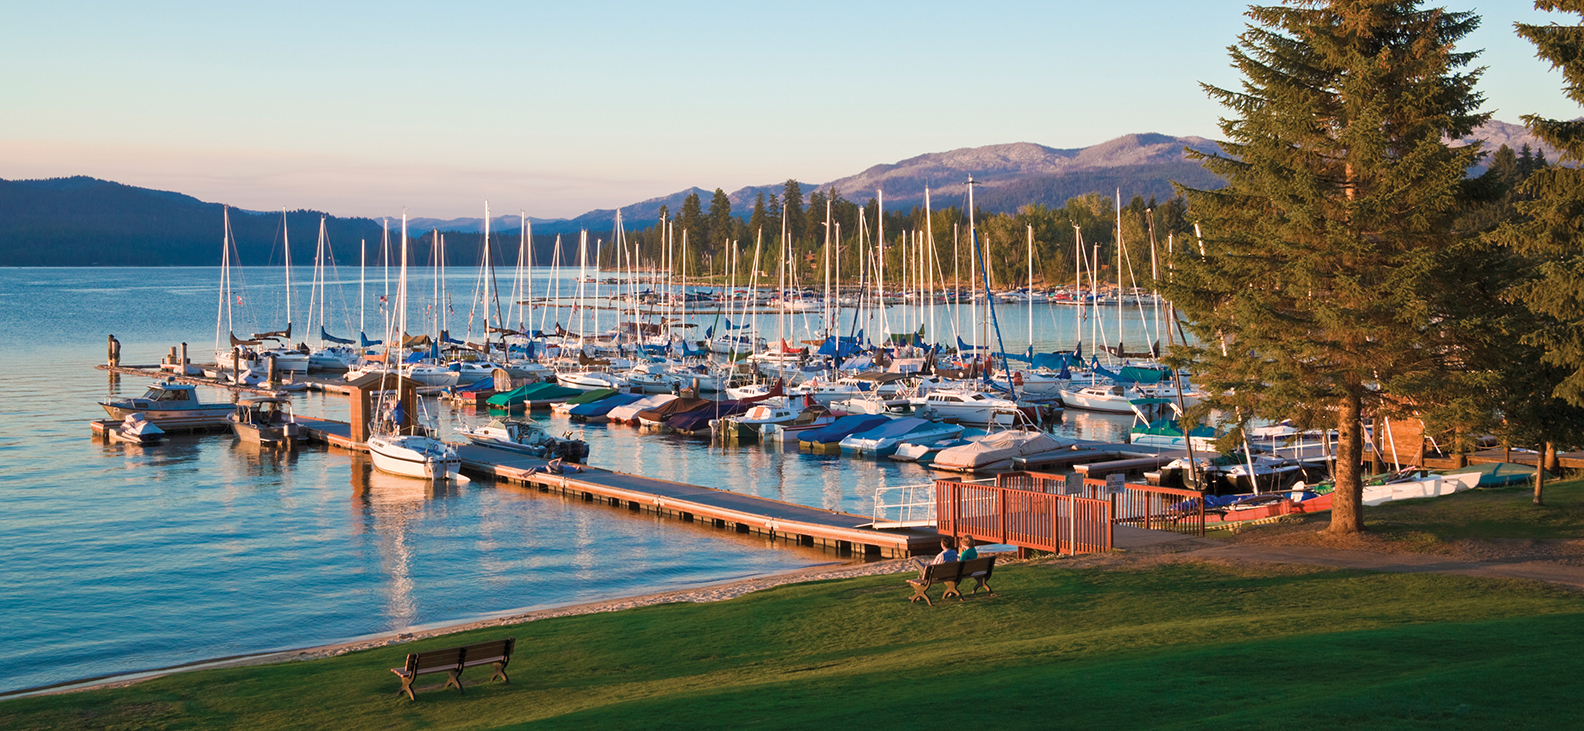 "Payette lake dock with many boats on a sunny day"